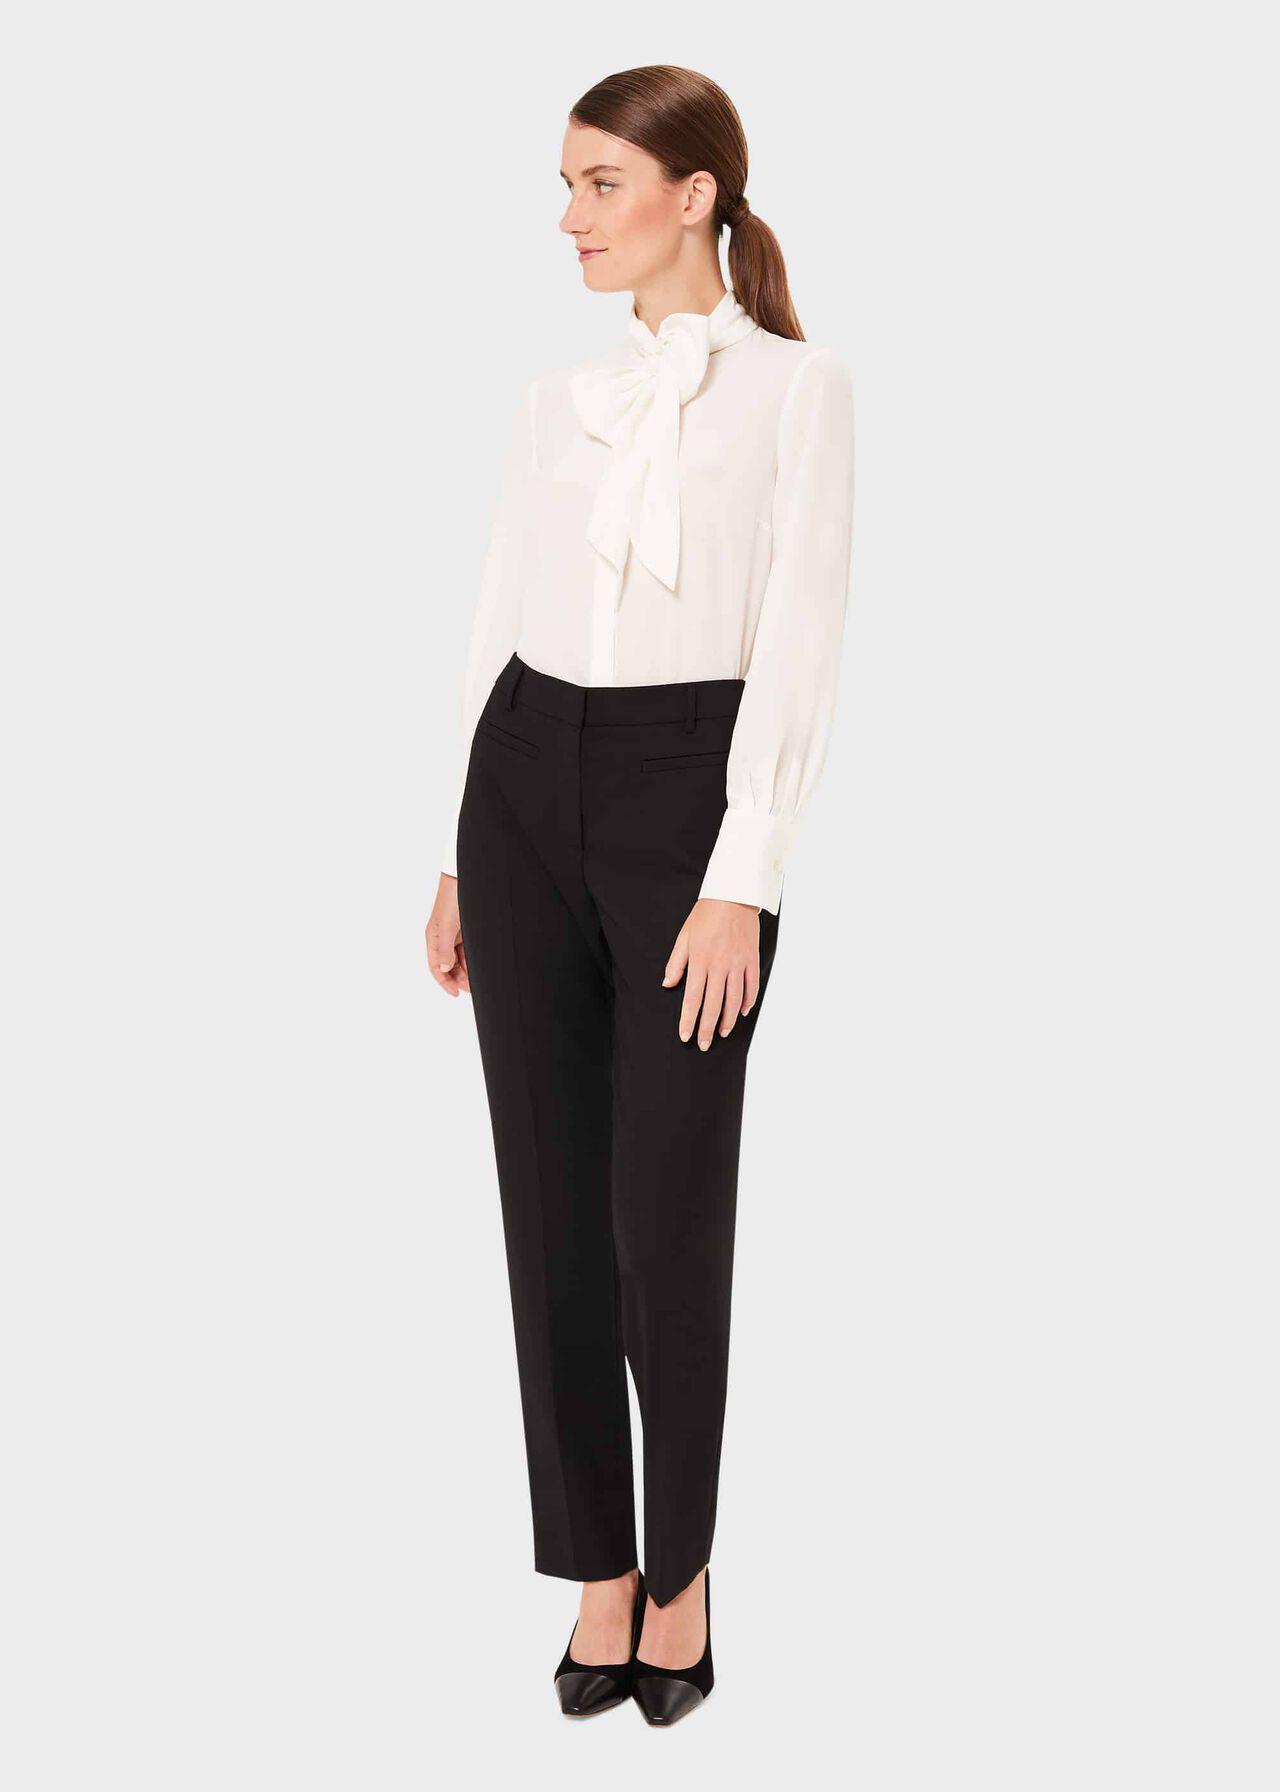 Hobbs Beatrice Silk Blouse in Ivory (White) - Lyst